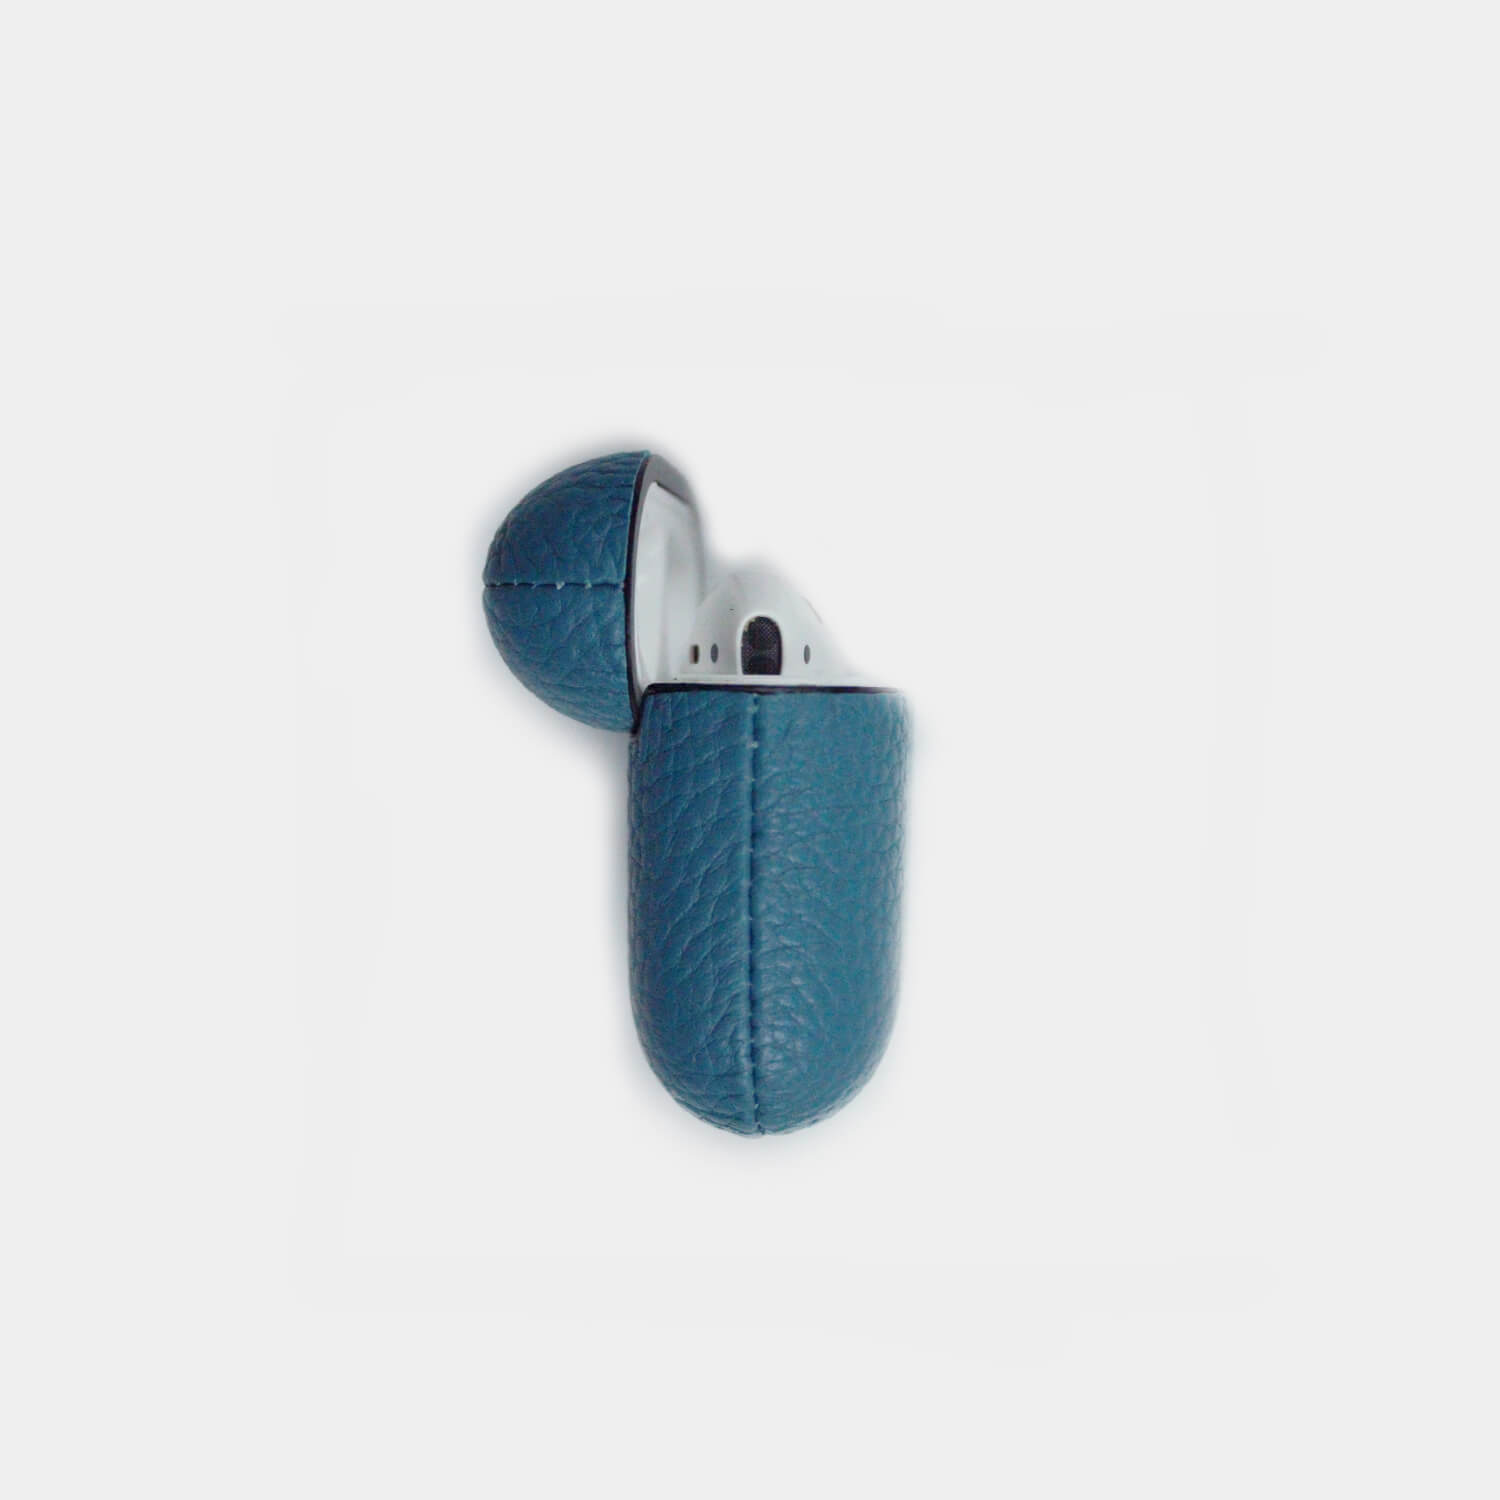 Pebble grain leather AirPods and AirPods Pro case, branded with your company logo